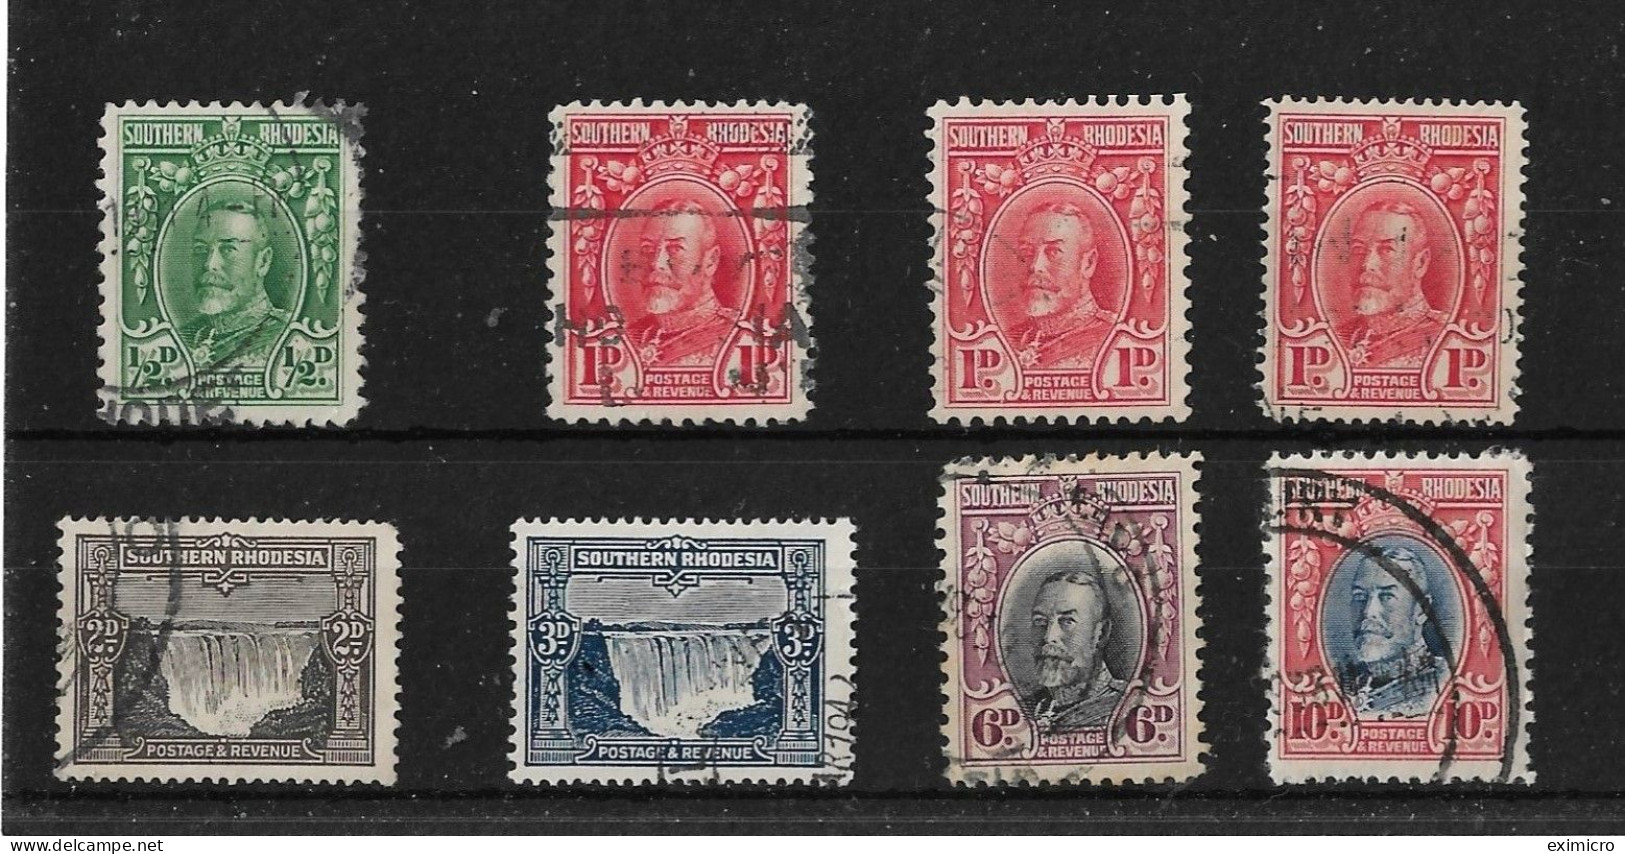 SOUTHERN RHODESIA 1931 - 1937 VALUES TO 10d SG 15,16,16a,16b,17,18,20,22 FINE USED Cat £25+ - Southern Rhodesia (...-1964)